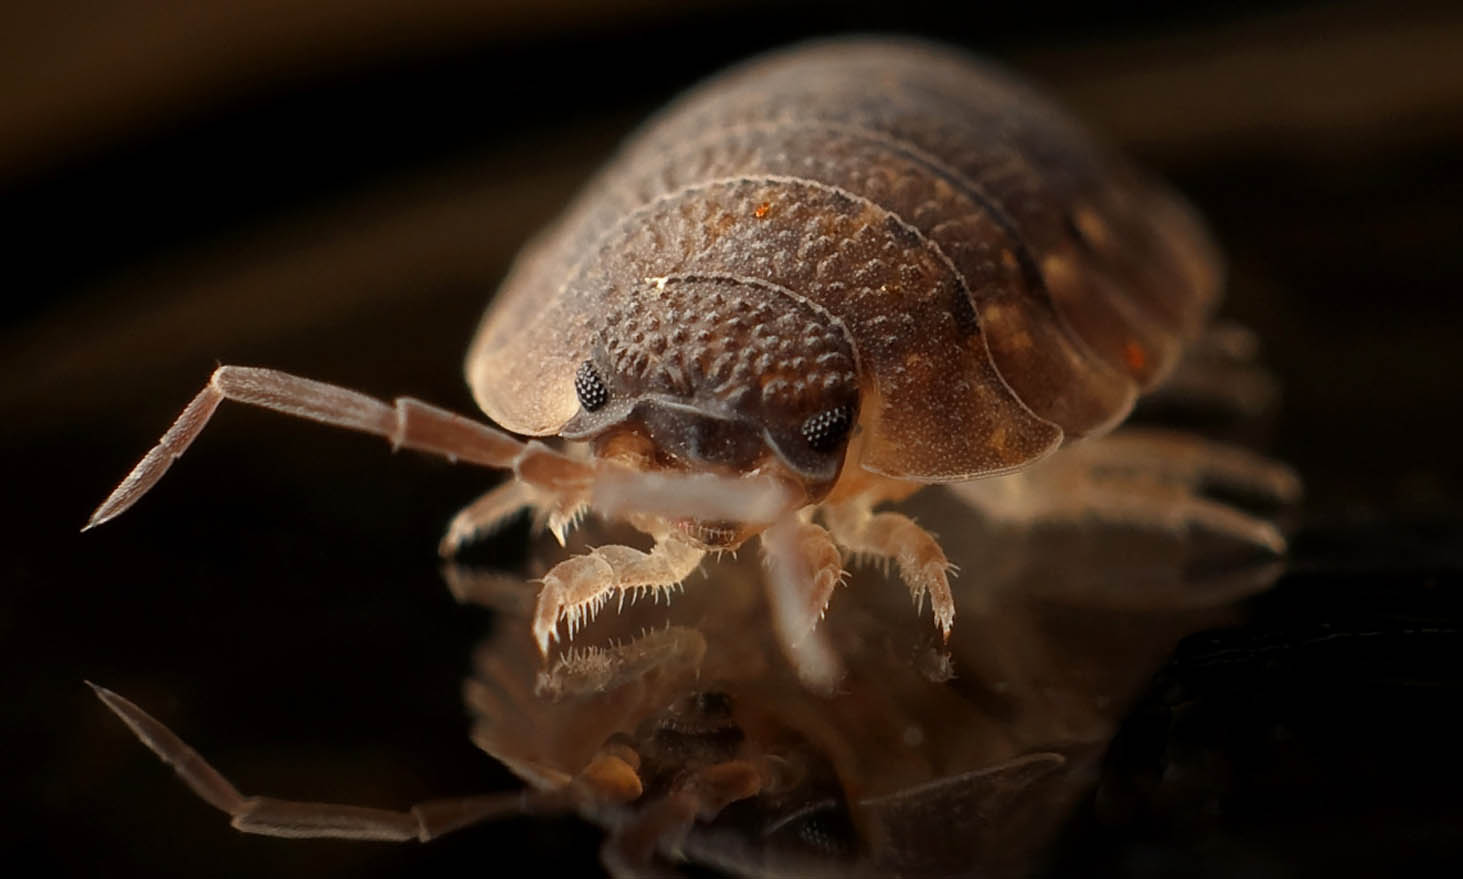 where do bed bugs come from